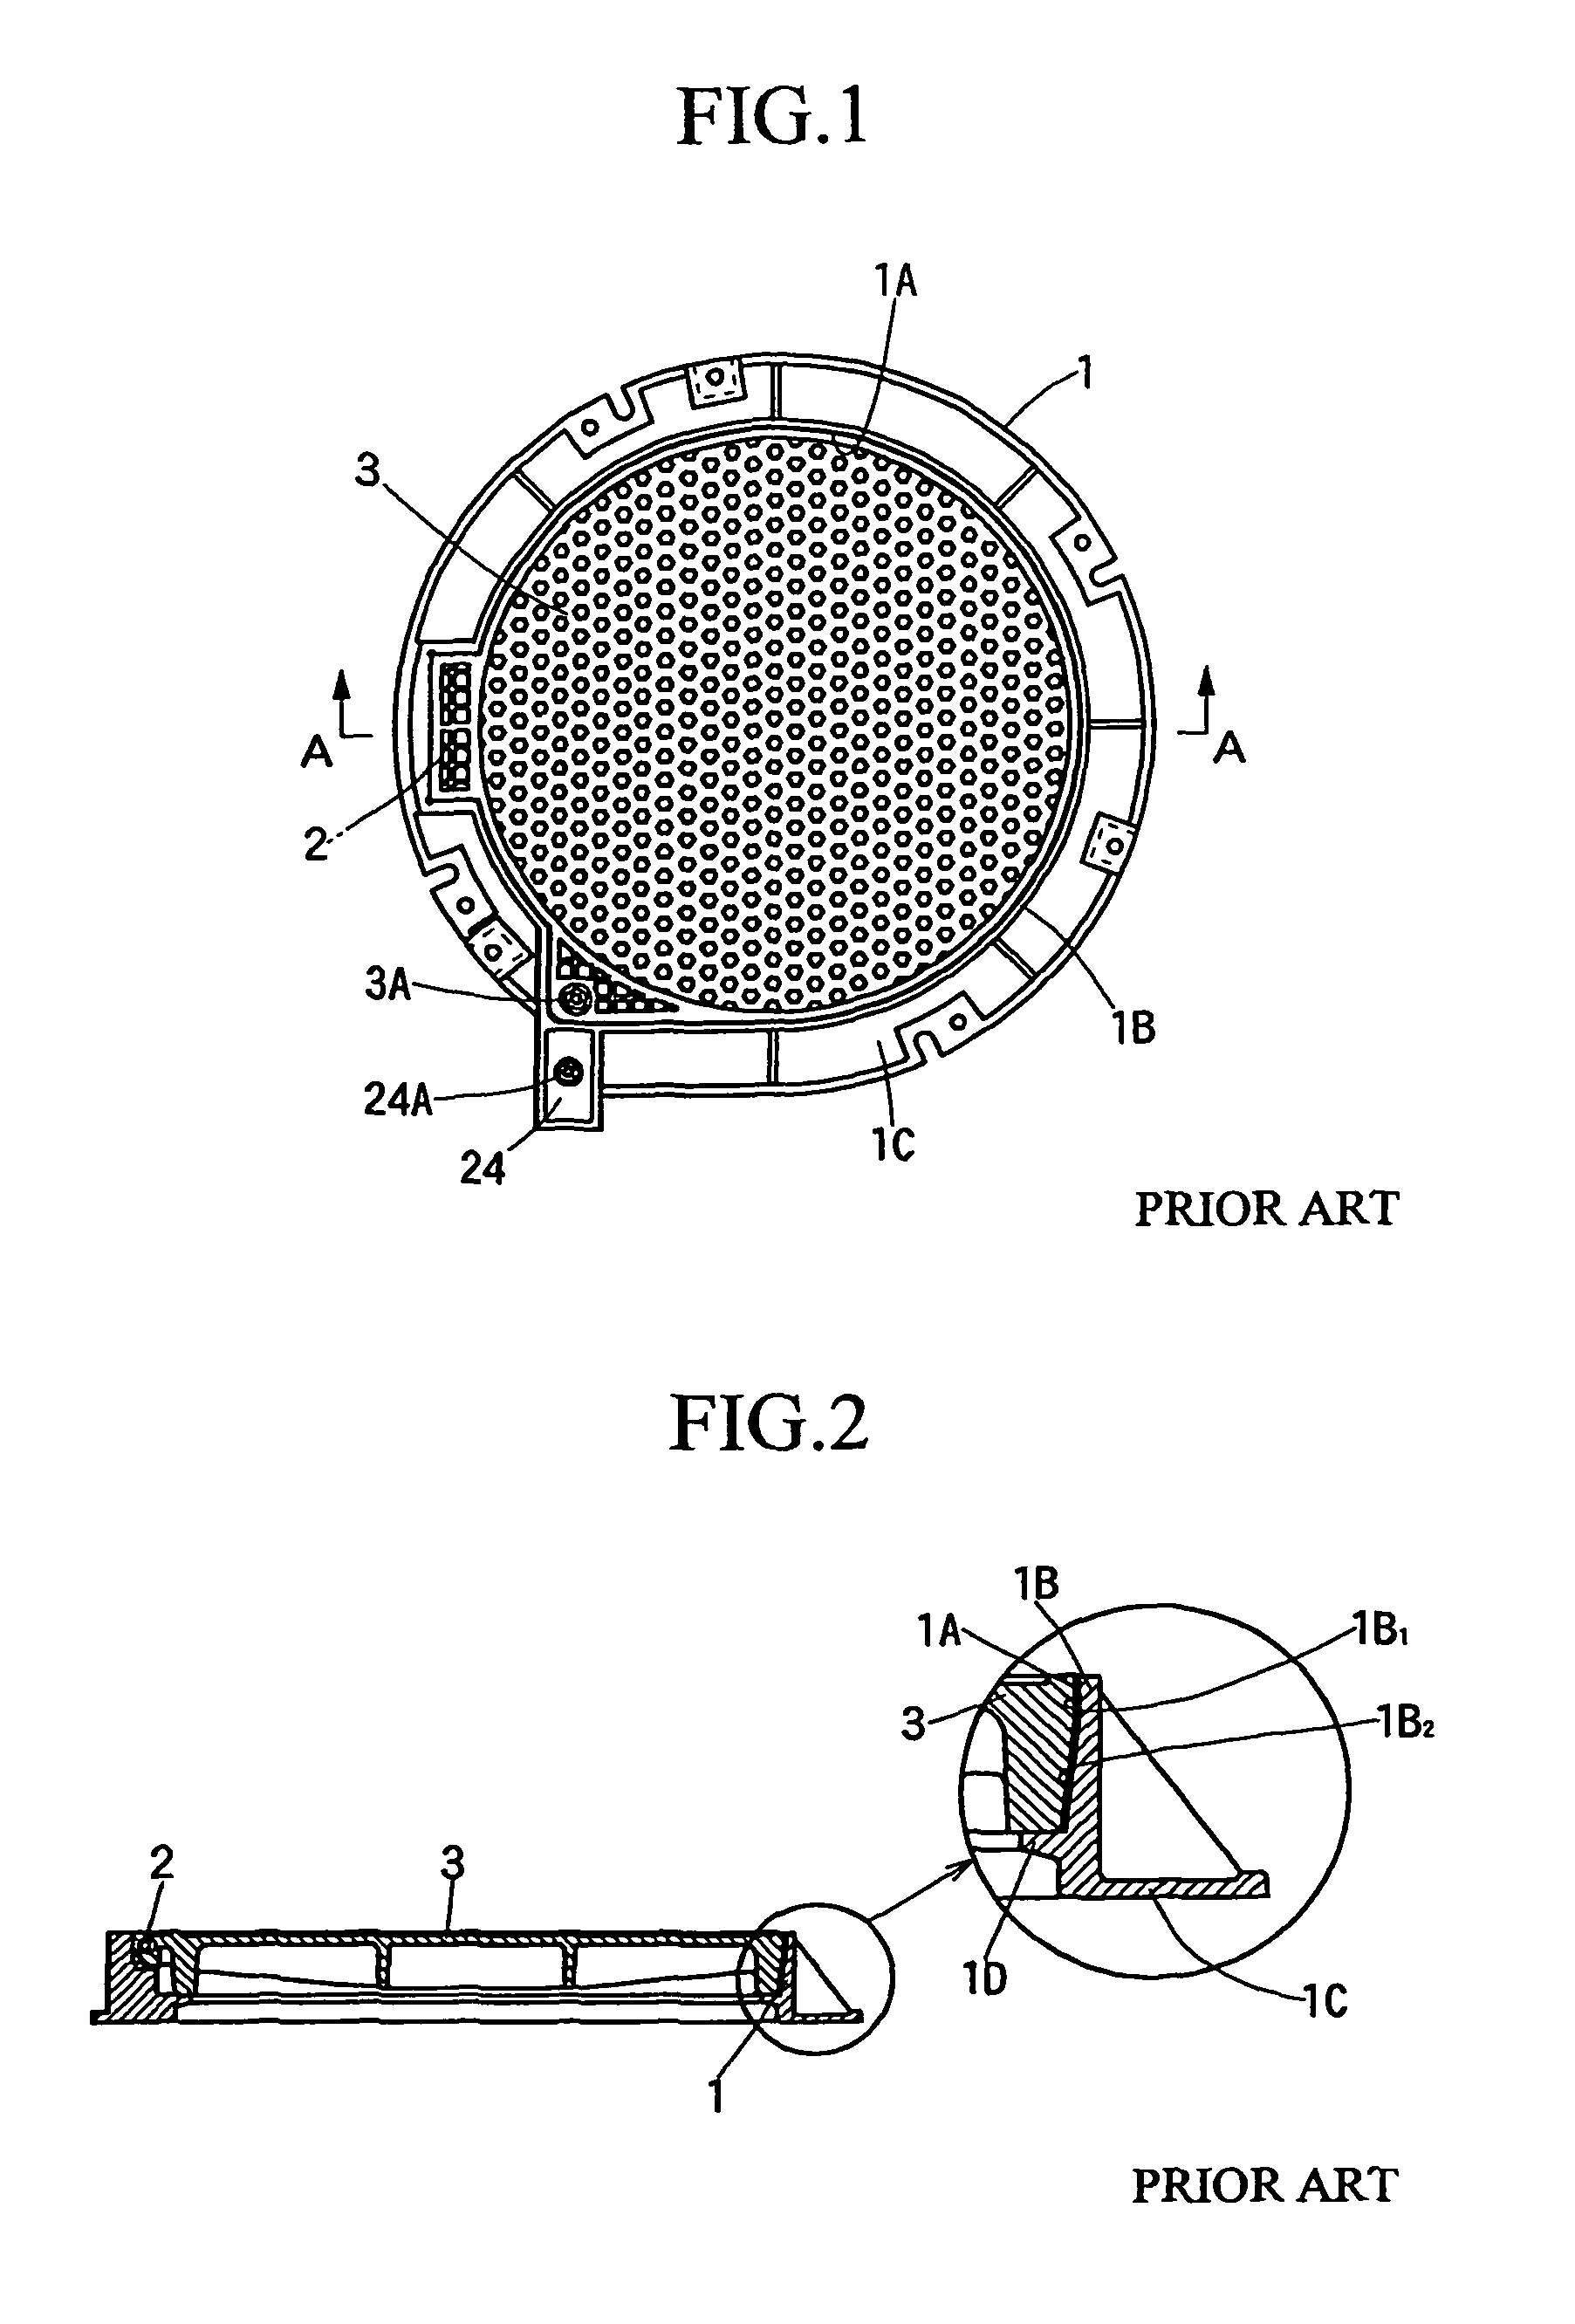 Opening/closing device for manhole cover